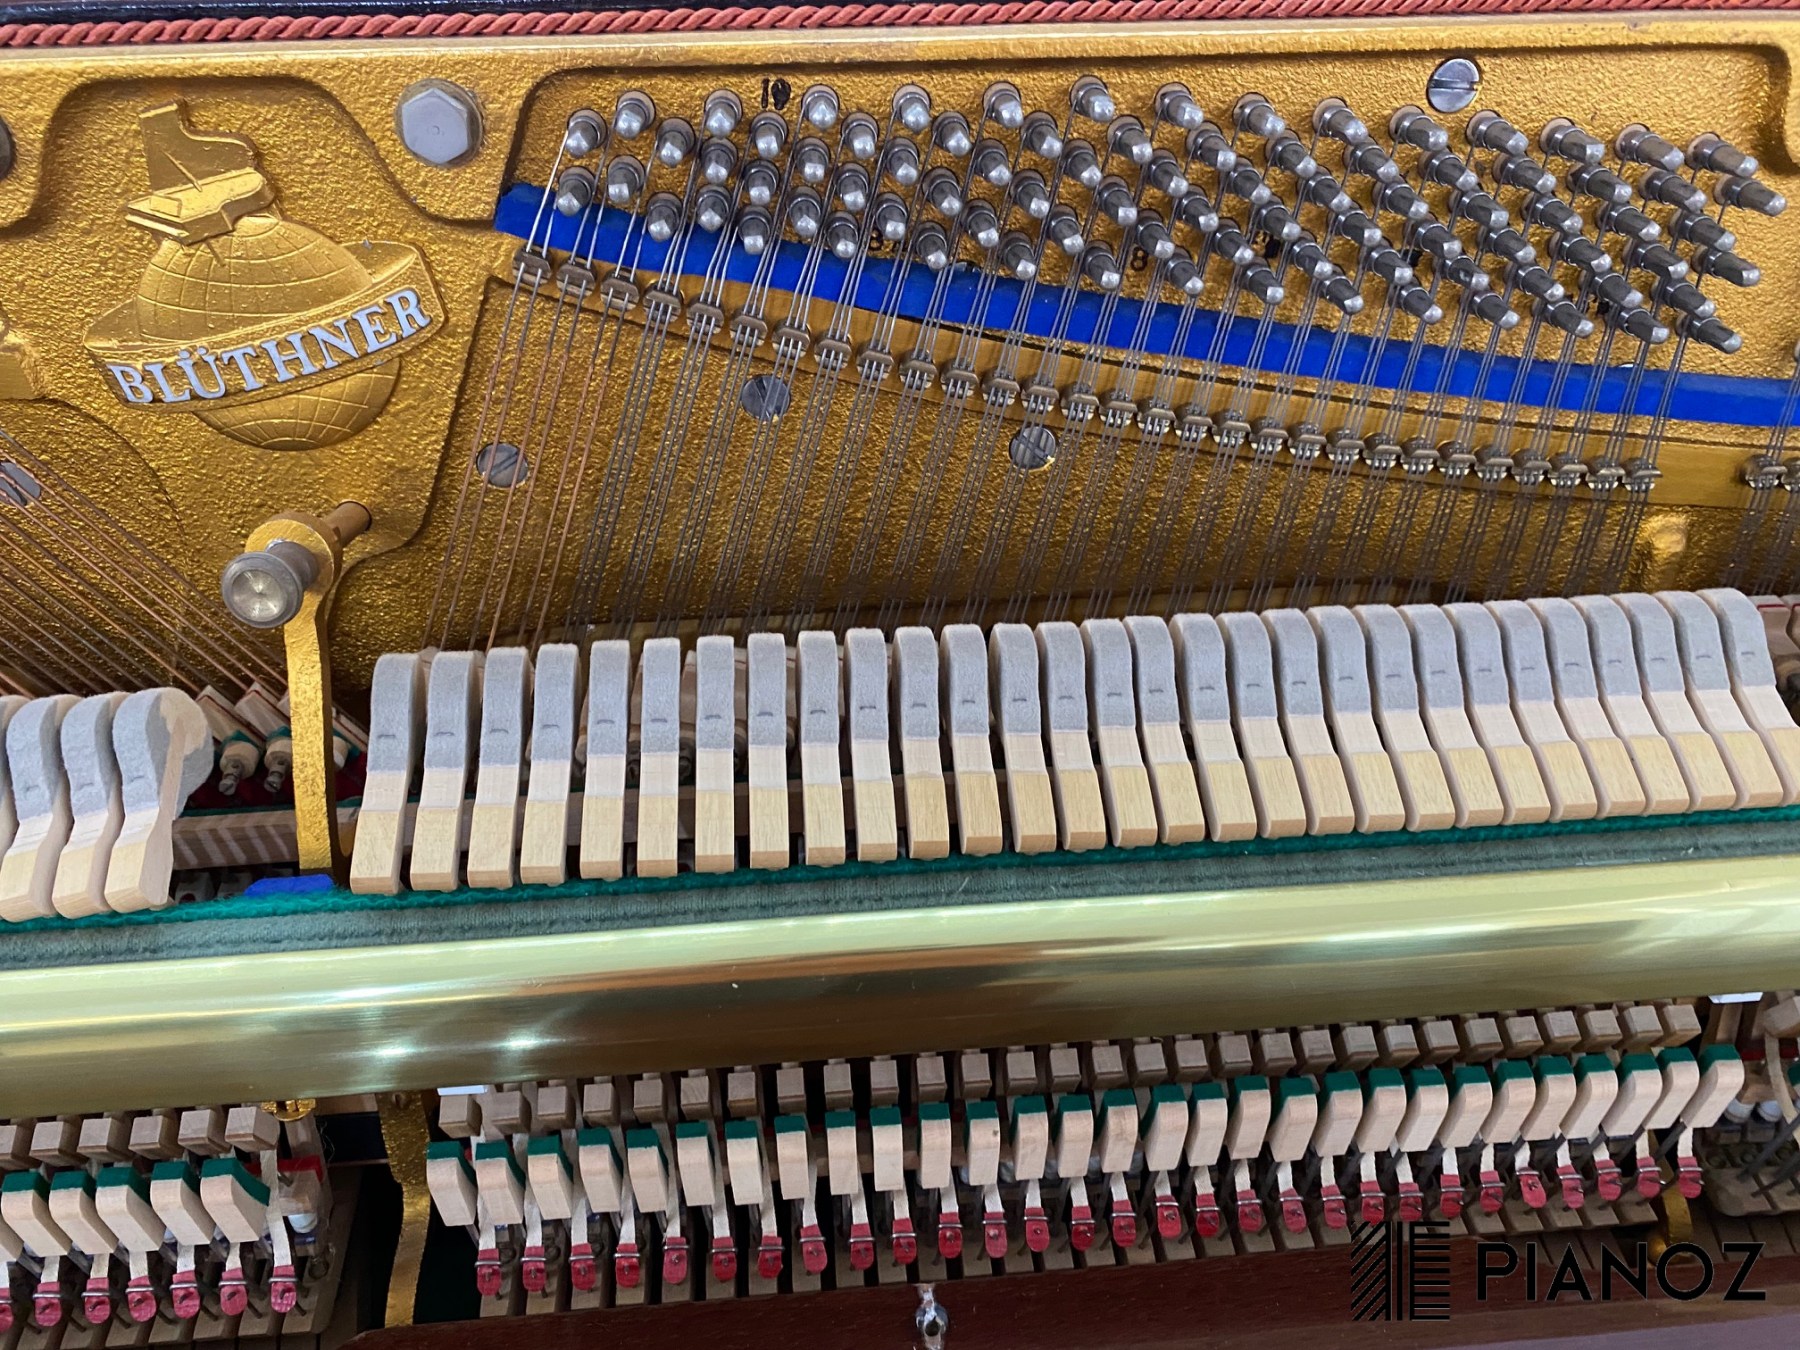 Bluthner 112 Upright Piano piano for sale in UK